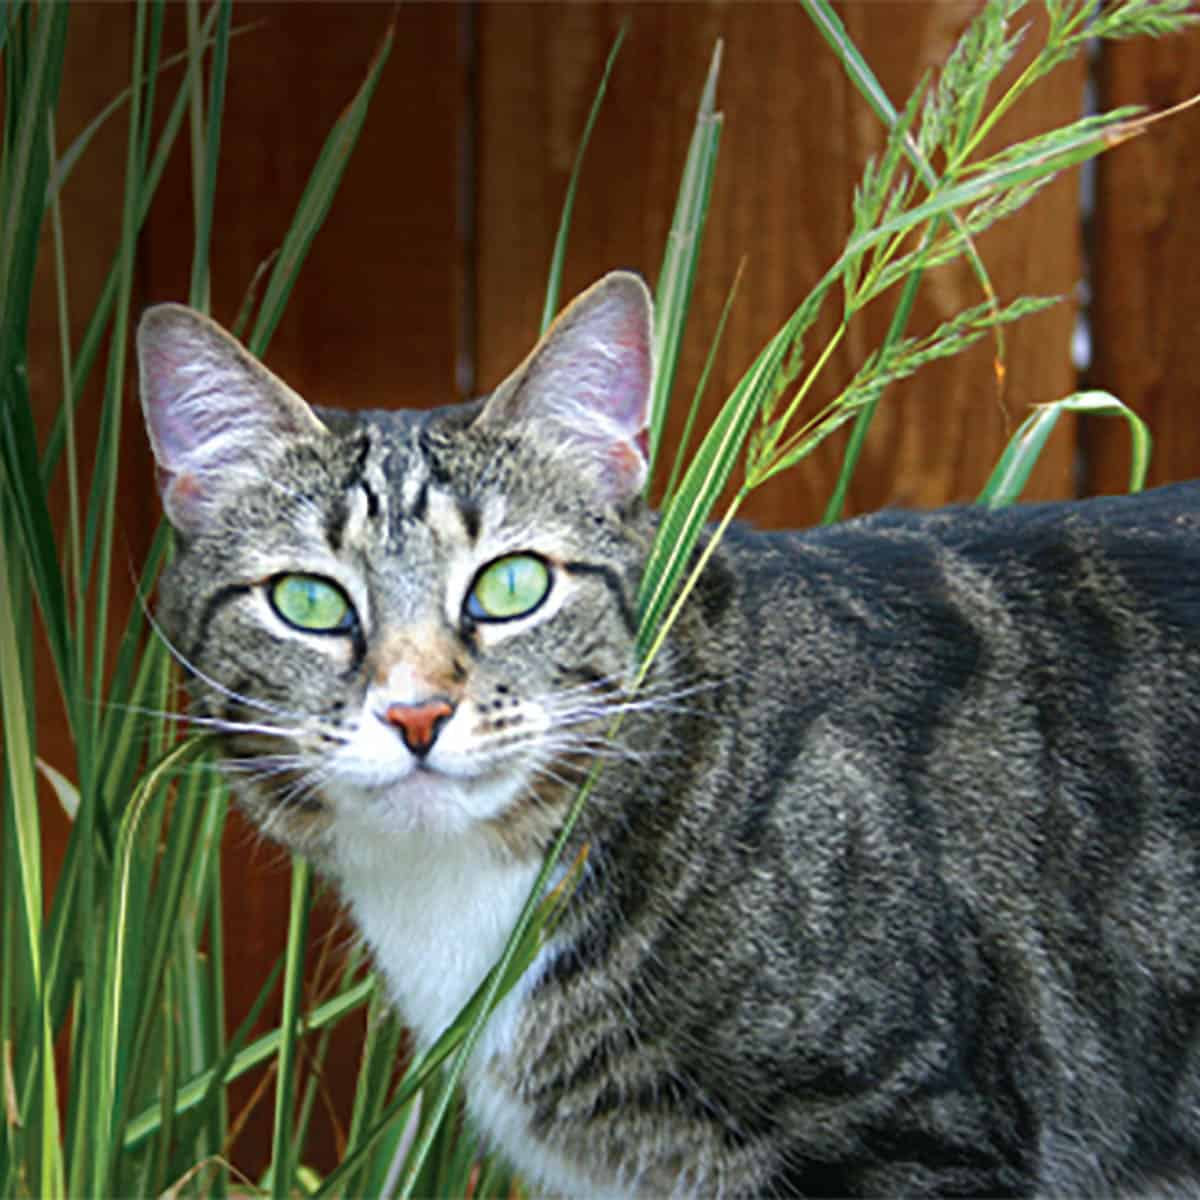 Juno the cat in tall green grass.